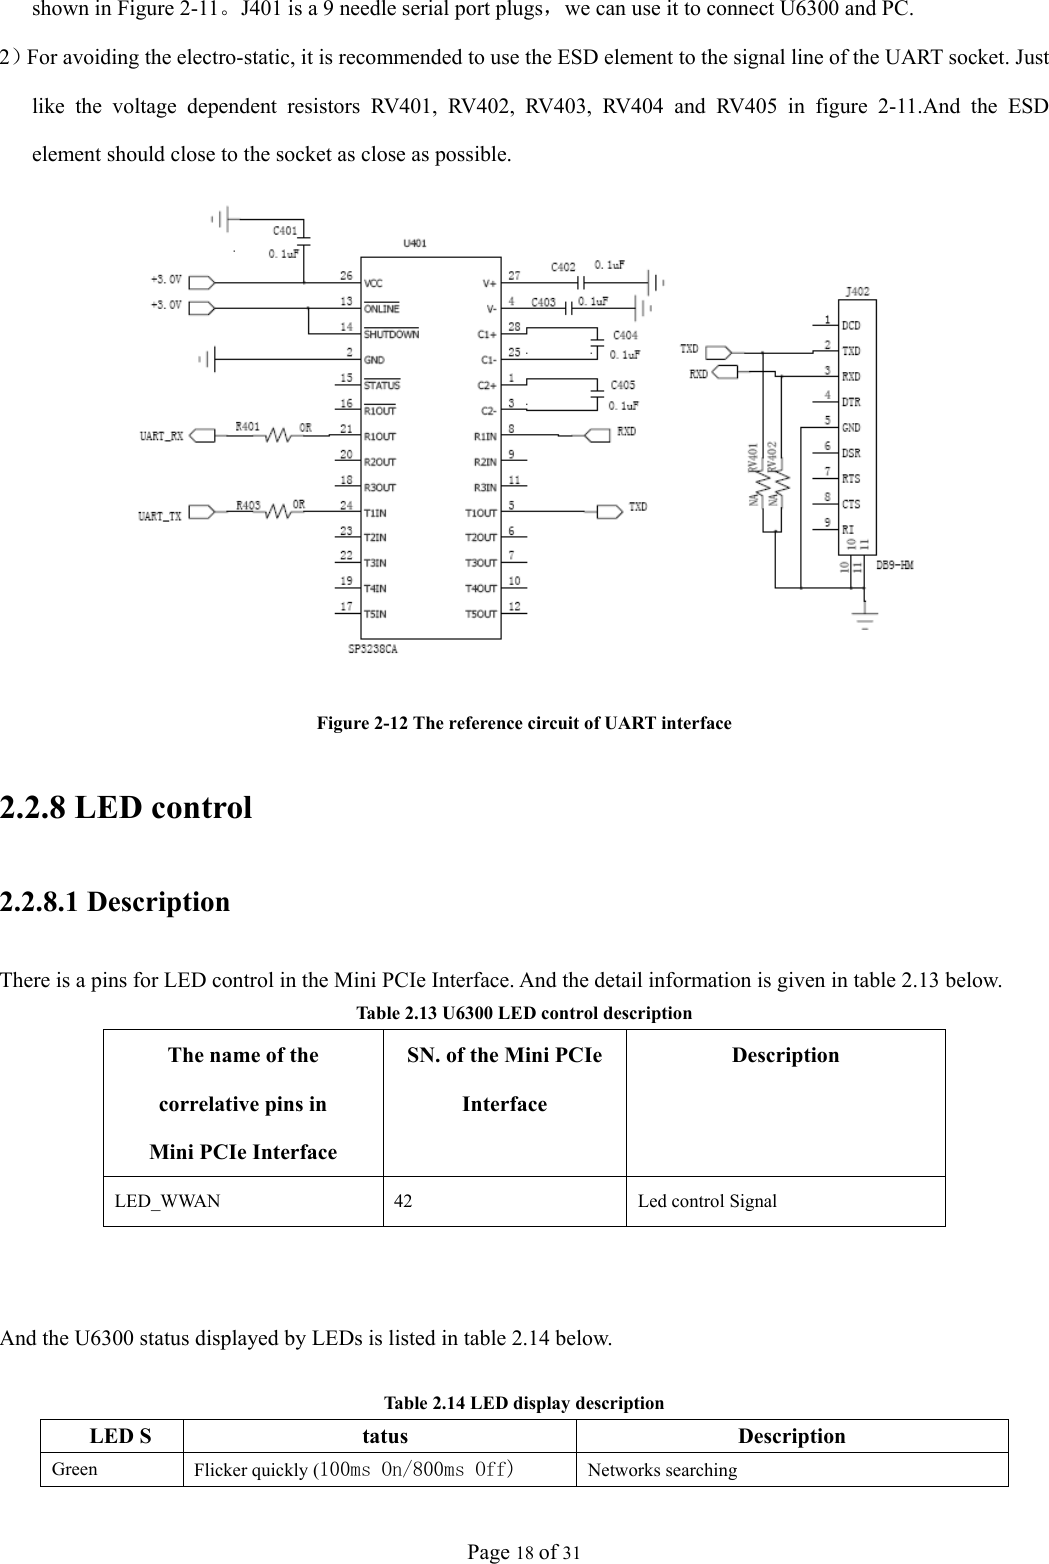 Page 18 of 31 shown in Figure 2-11。J401 is a 9 needle serial port plugs，we can use it to connect U6300 and PC. 2）For avoiding the electro-static, it is recommended to use the ESD element to the signal line of the UART socket. Just like the voltage dependent resistors RV401, RV402, RV403, RV404 and RV405 in figure 2-11.And the ESD element should close to the socket as close as possible.  Figure 2-12 The reference circuit of UART interface 2.2.8 LED control 2.2.8.1 Description There is a pins for LED control in the Mini PCIe Interface. And the detail information is given in table 2.13 below. Table 2.13 U6300 LED control description          And the U6300 status displayed by LEDs is listed in table 2.14 below.  Table 2.14 LED display description LED S tatus  Description Green  Flicker quickly (100ms On/800ms Off) Networks searching The name of the correlative pins in Mini PCIe Interface SN. of the Mini PCIe Interface Description LED_WWAN 42  Led control Signal 